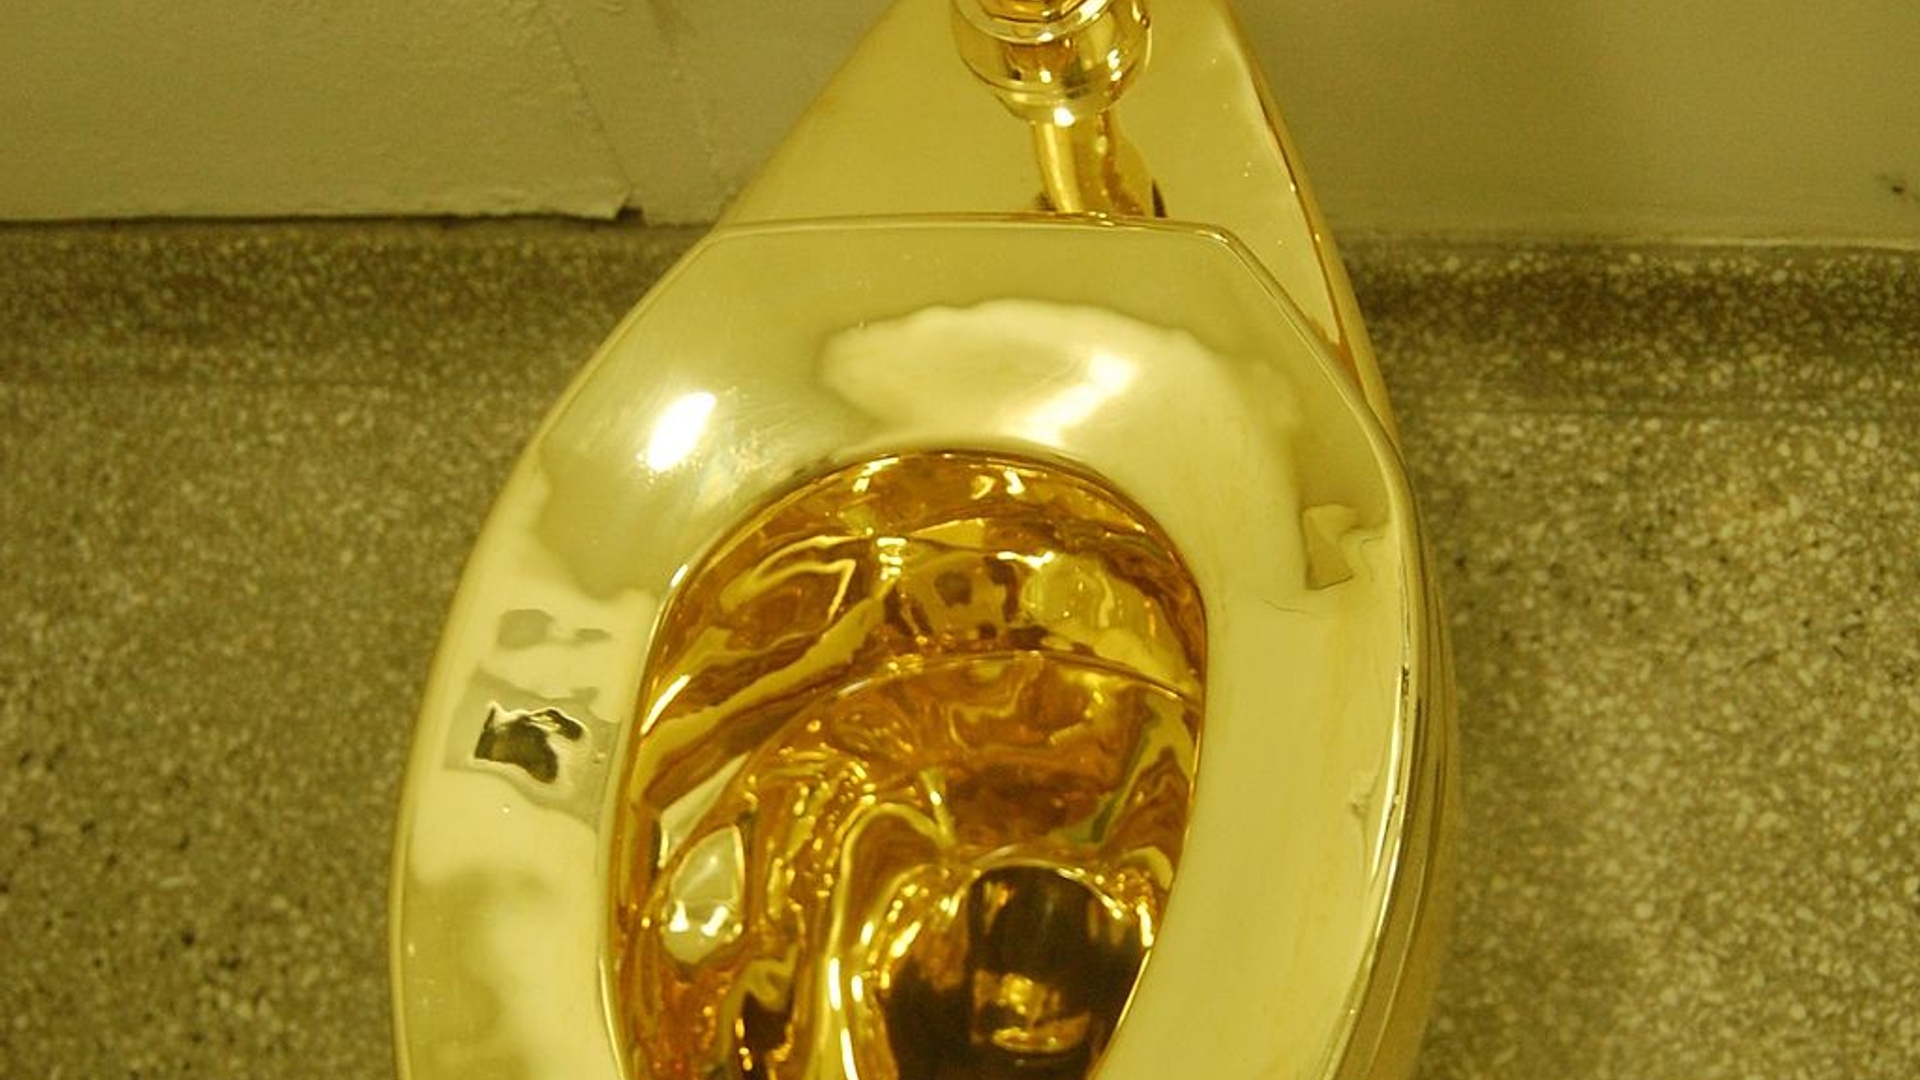 Gold-colored_toilet